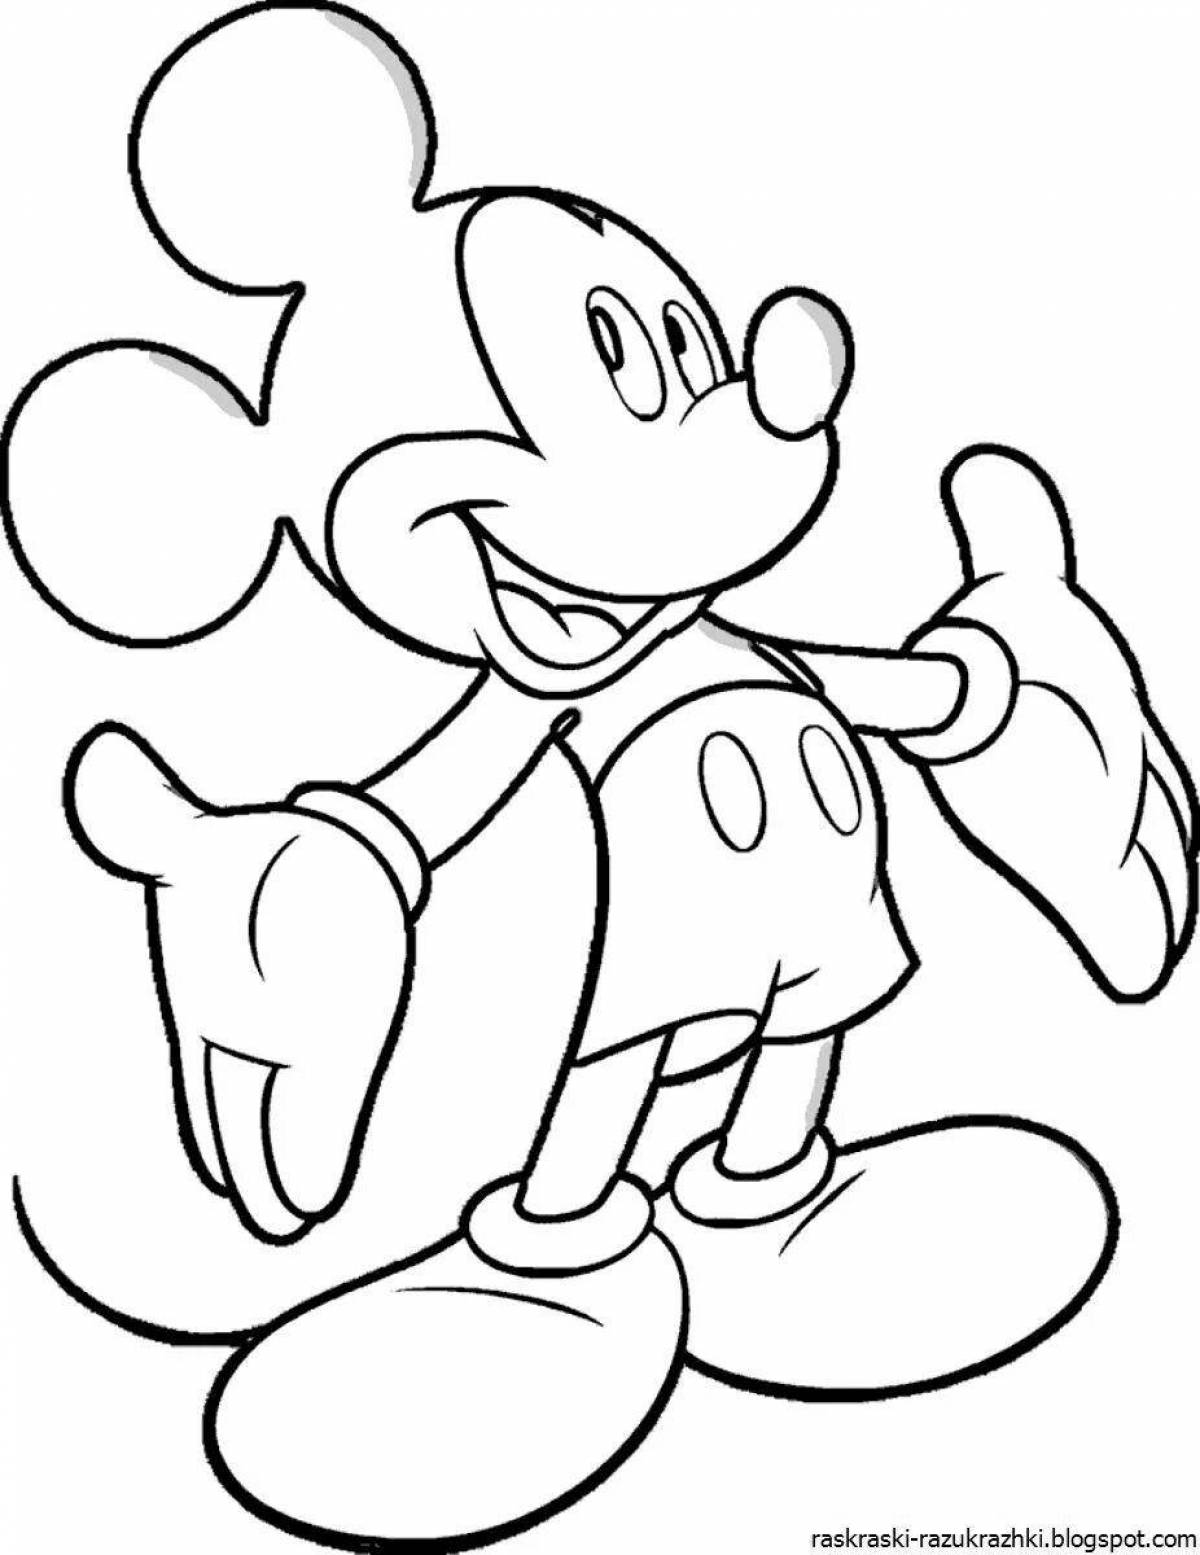 Cute squick coloring page